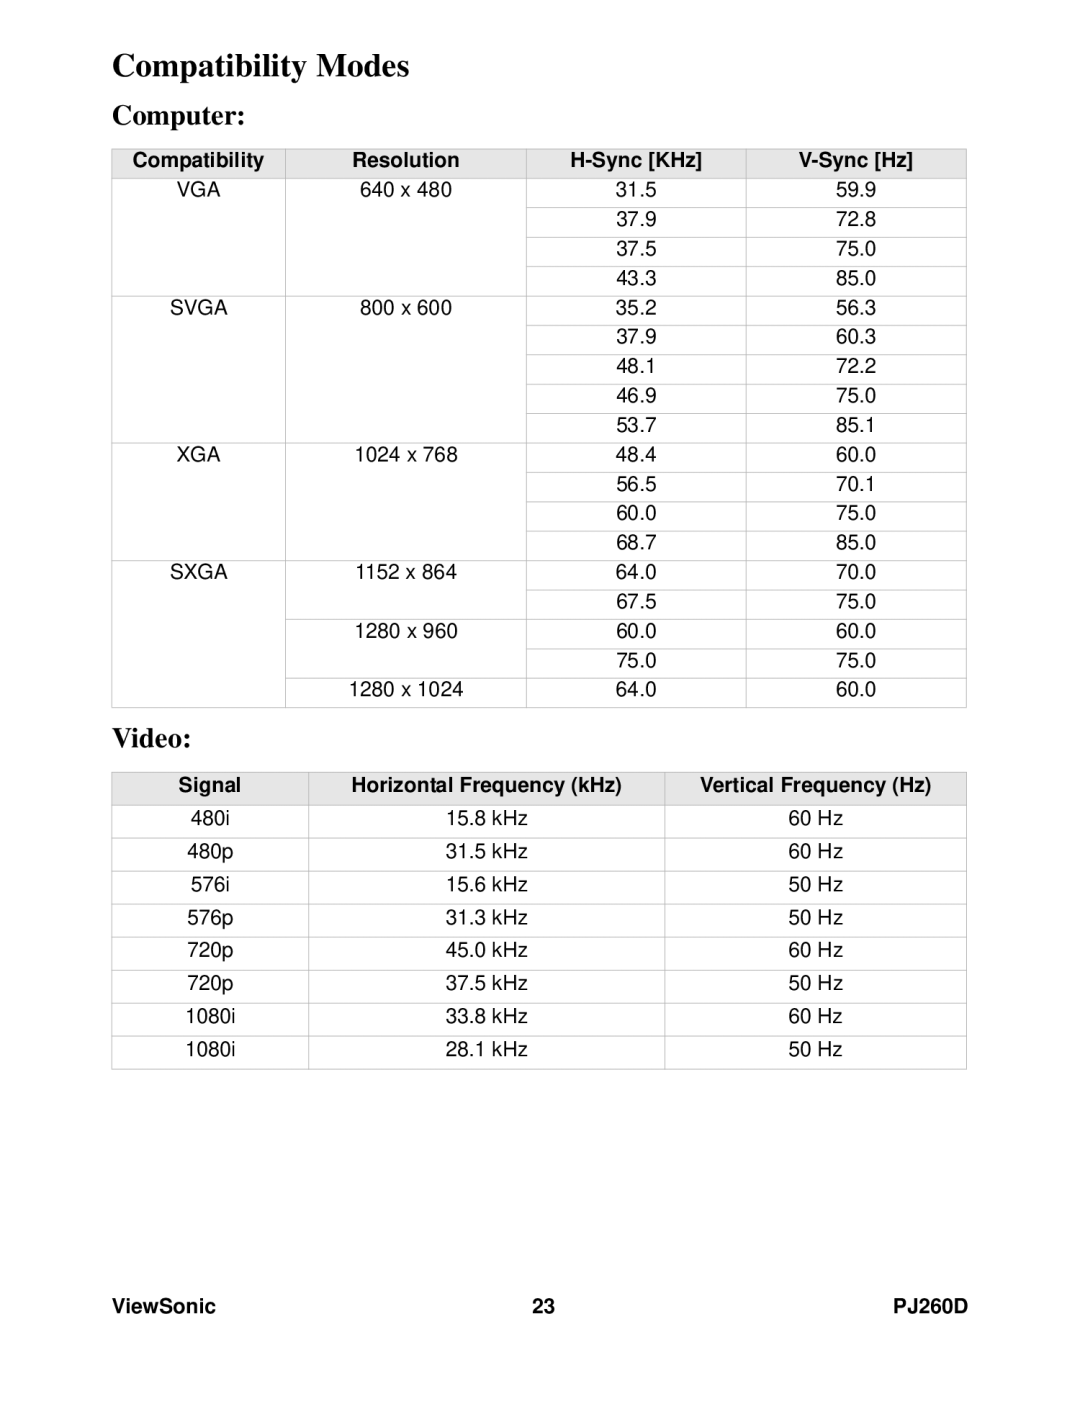 ViewSonic VS11935 Compatibility Modes, Computer, Video, Signal, Horizontal Frequency kHz, Vertical Frequency Hz, ViewSonic 